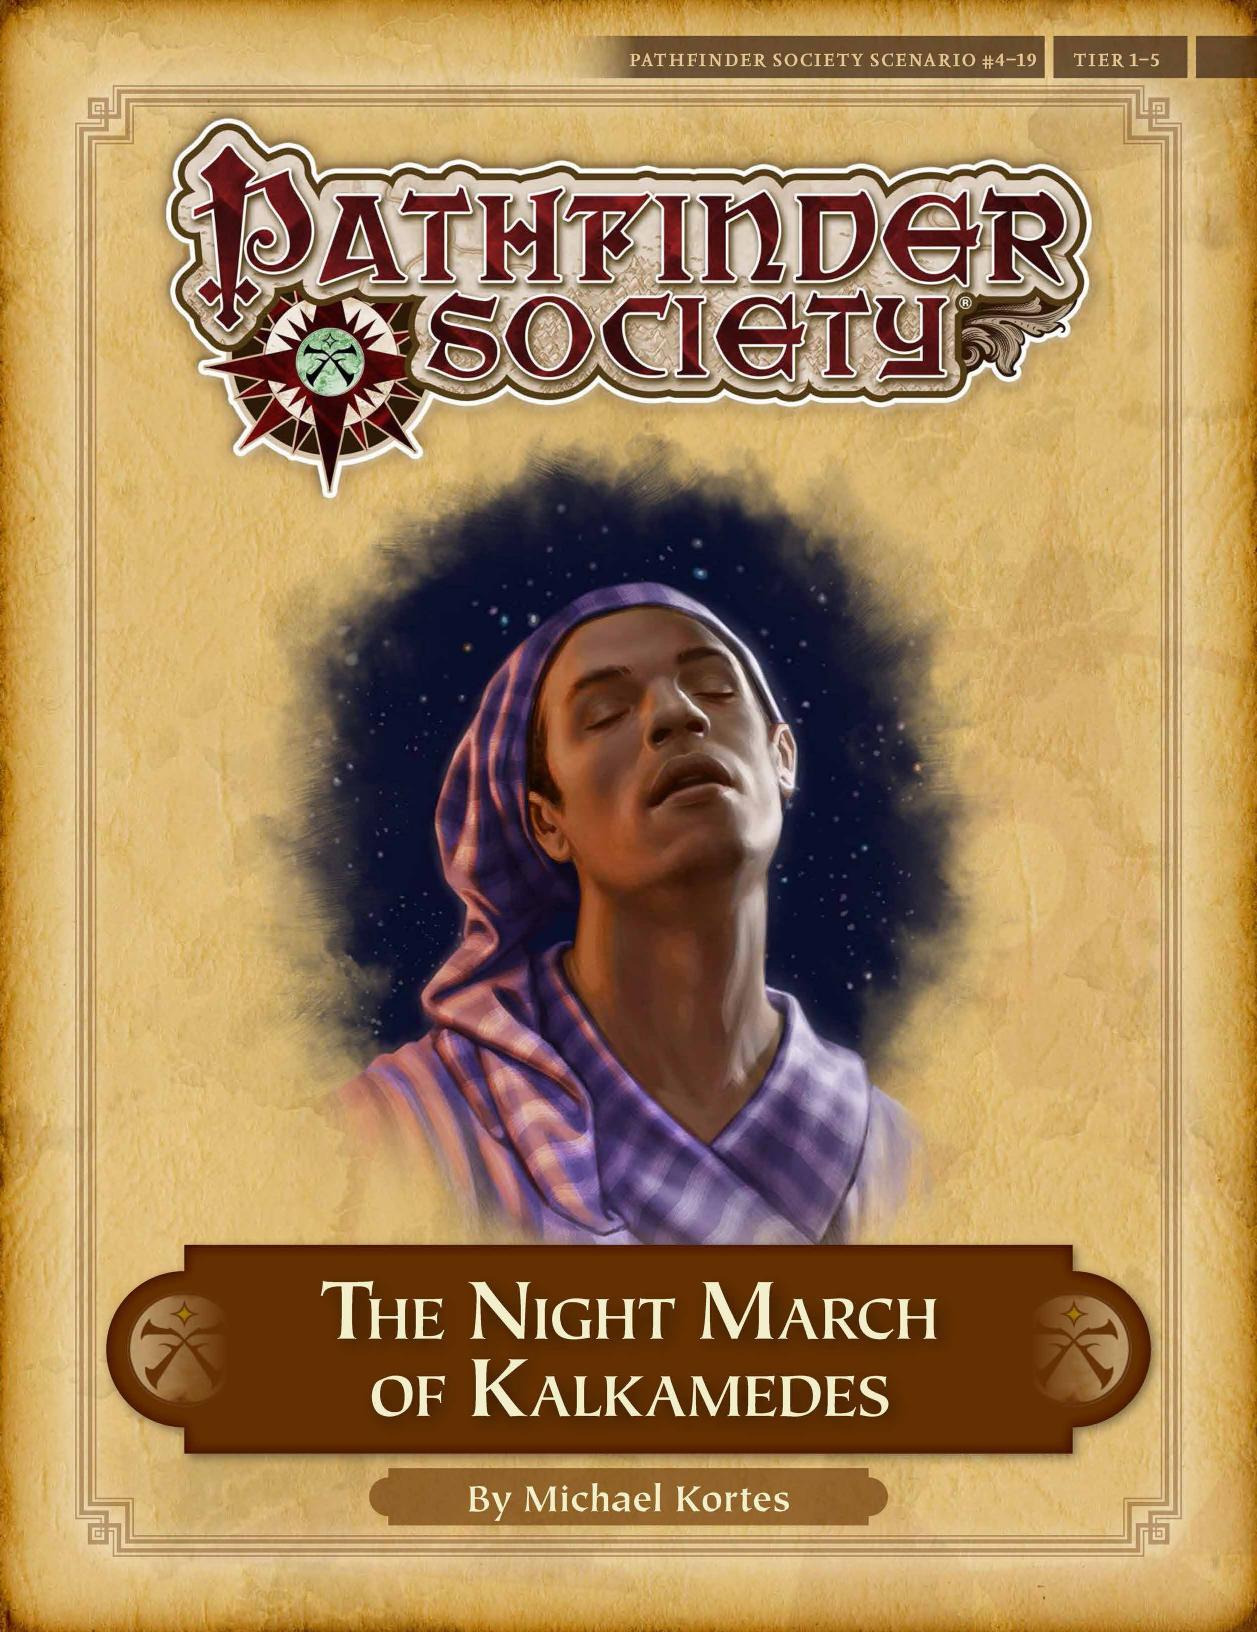 S04-19 The Night March of Kalkamedes